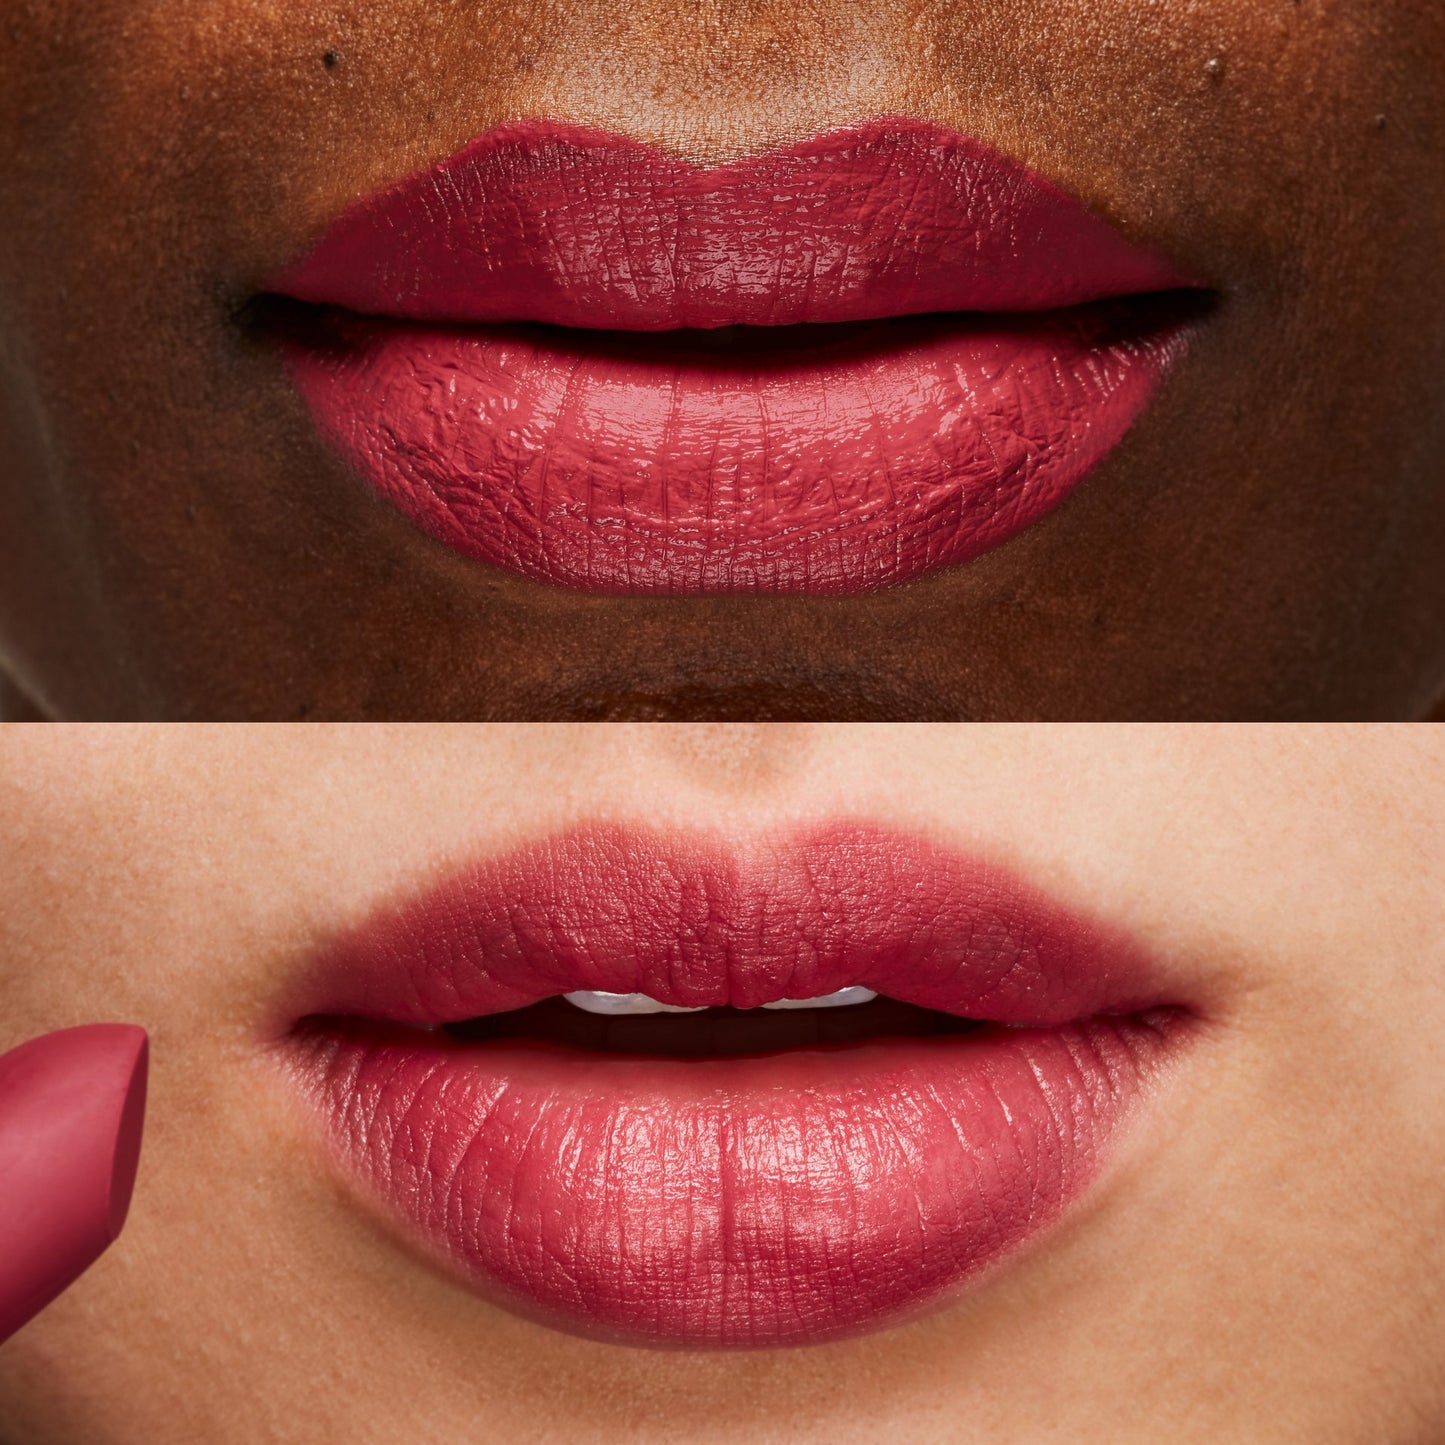 100% PURE Fruit Pigmented Cocoa Butter Matte Lipstick winecup